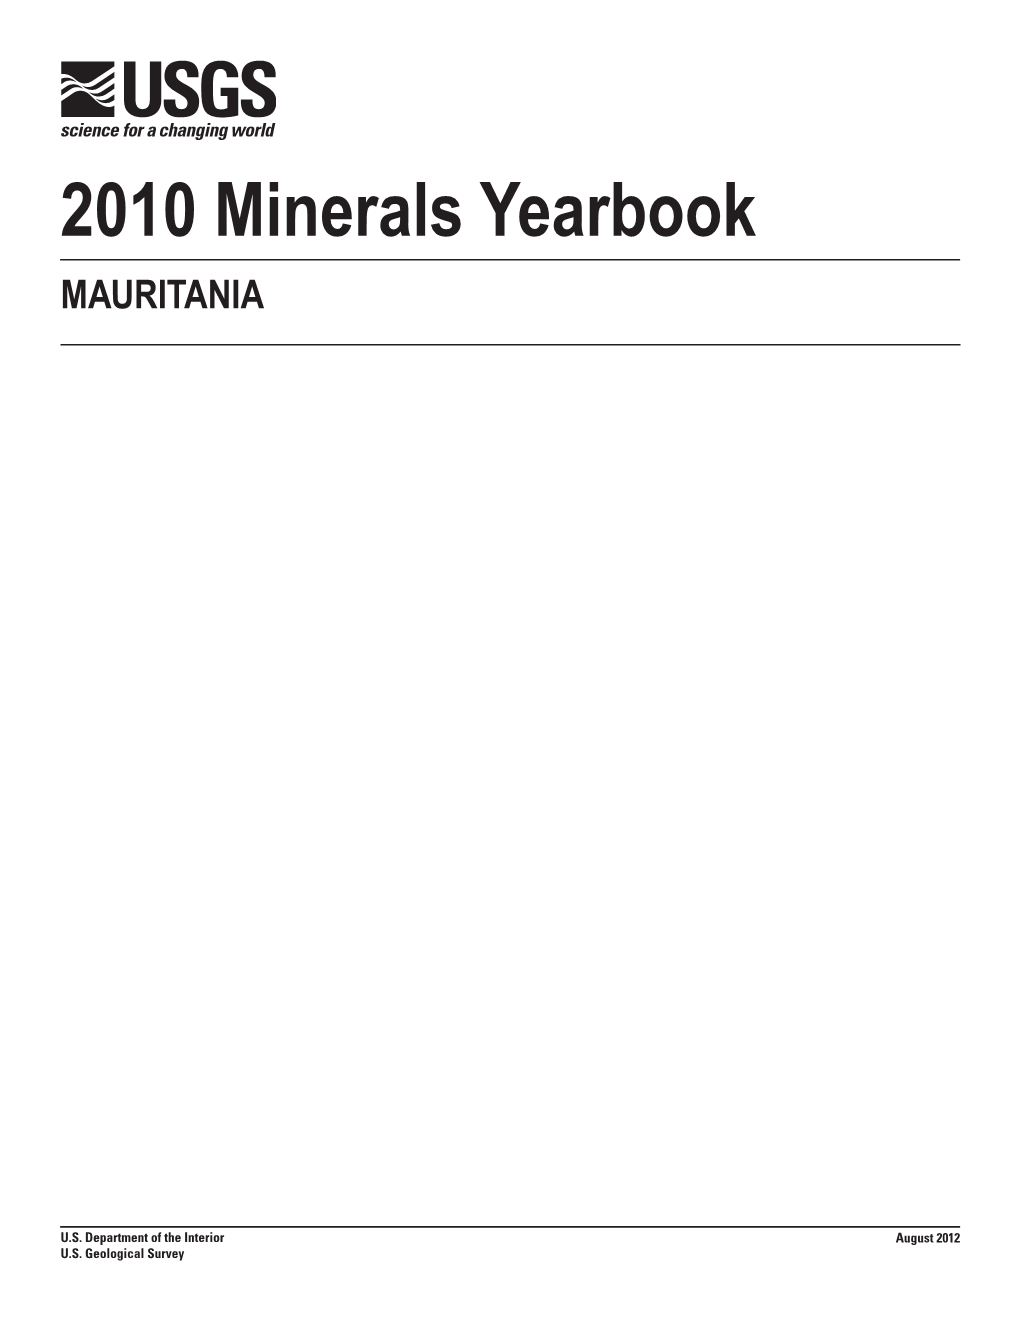 The Mineral Industry of Mauritania in 2010